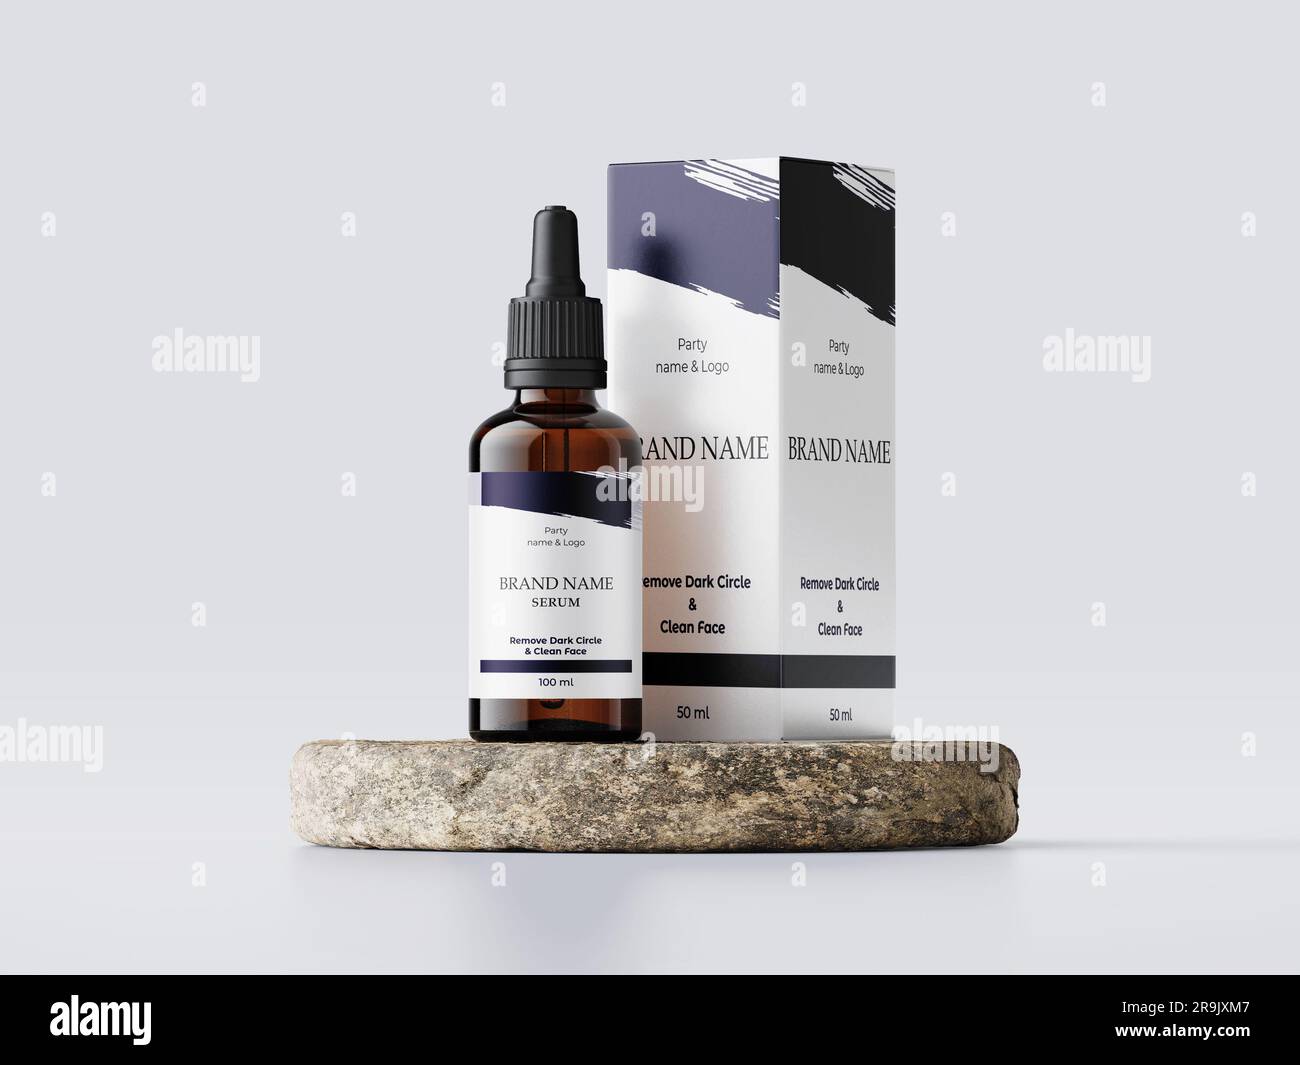 Cosmetic products mockup design template. 3d design 3d realistic design. Serum design. Serum bottle. White background design.beauty product. Stock Photo